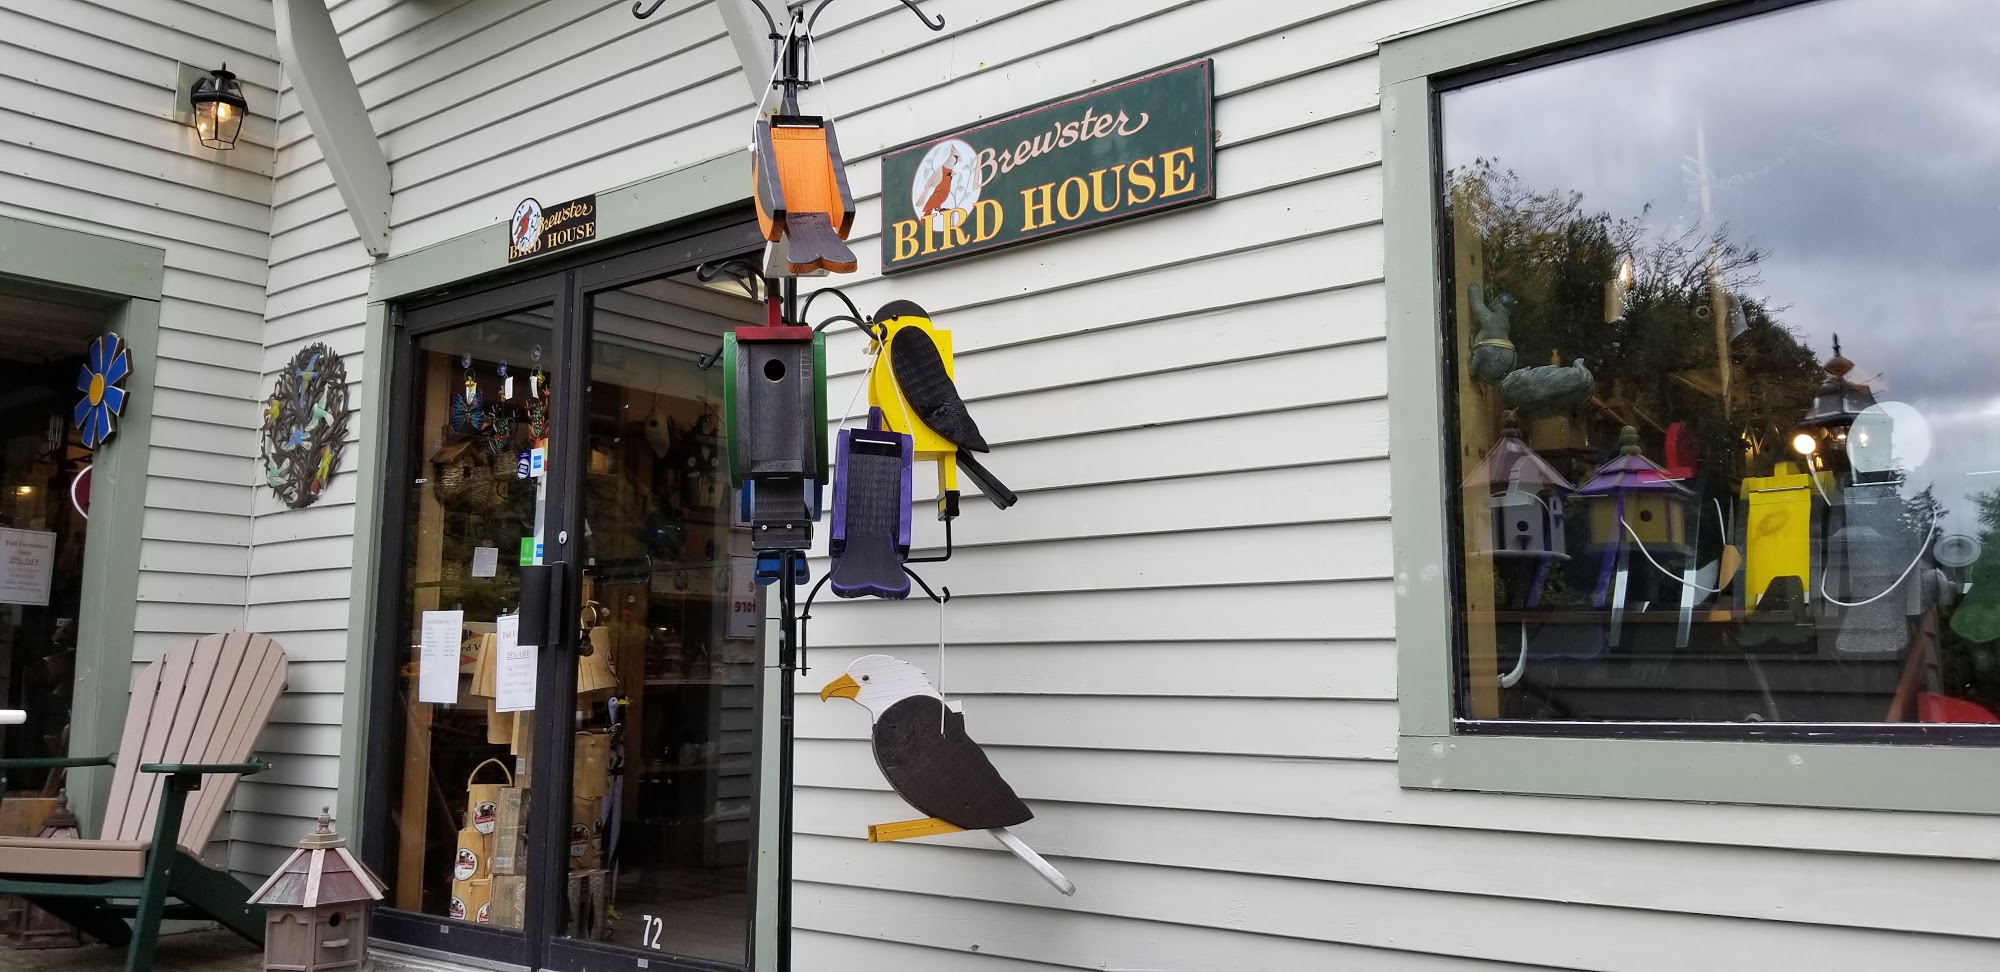 Brewster Bird House at Woodworks Gallery